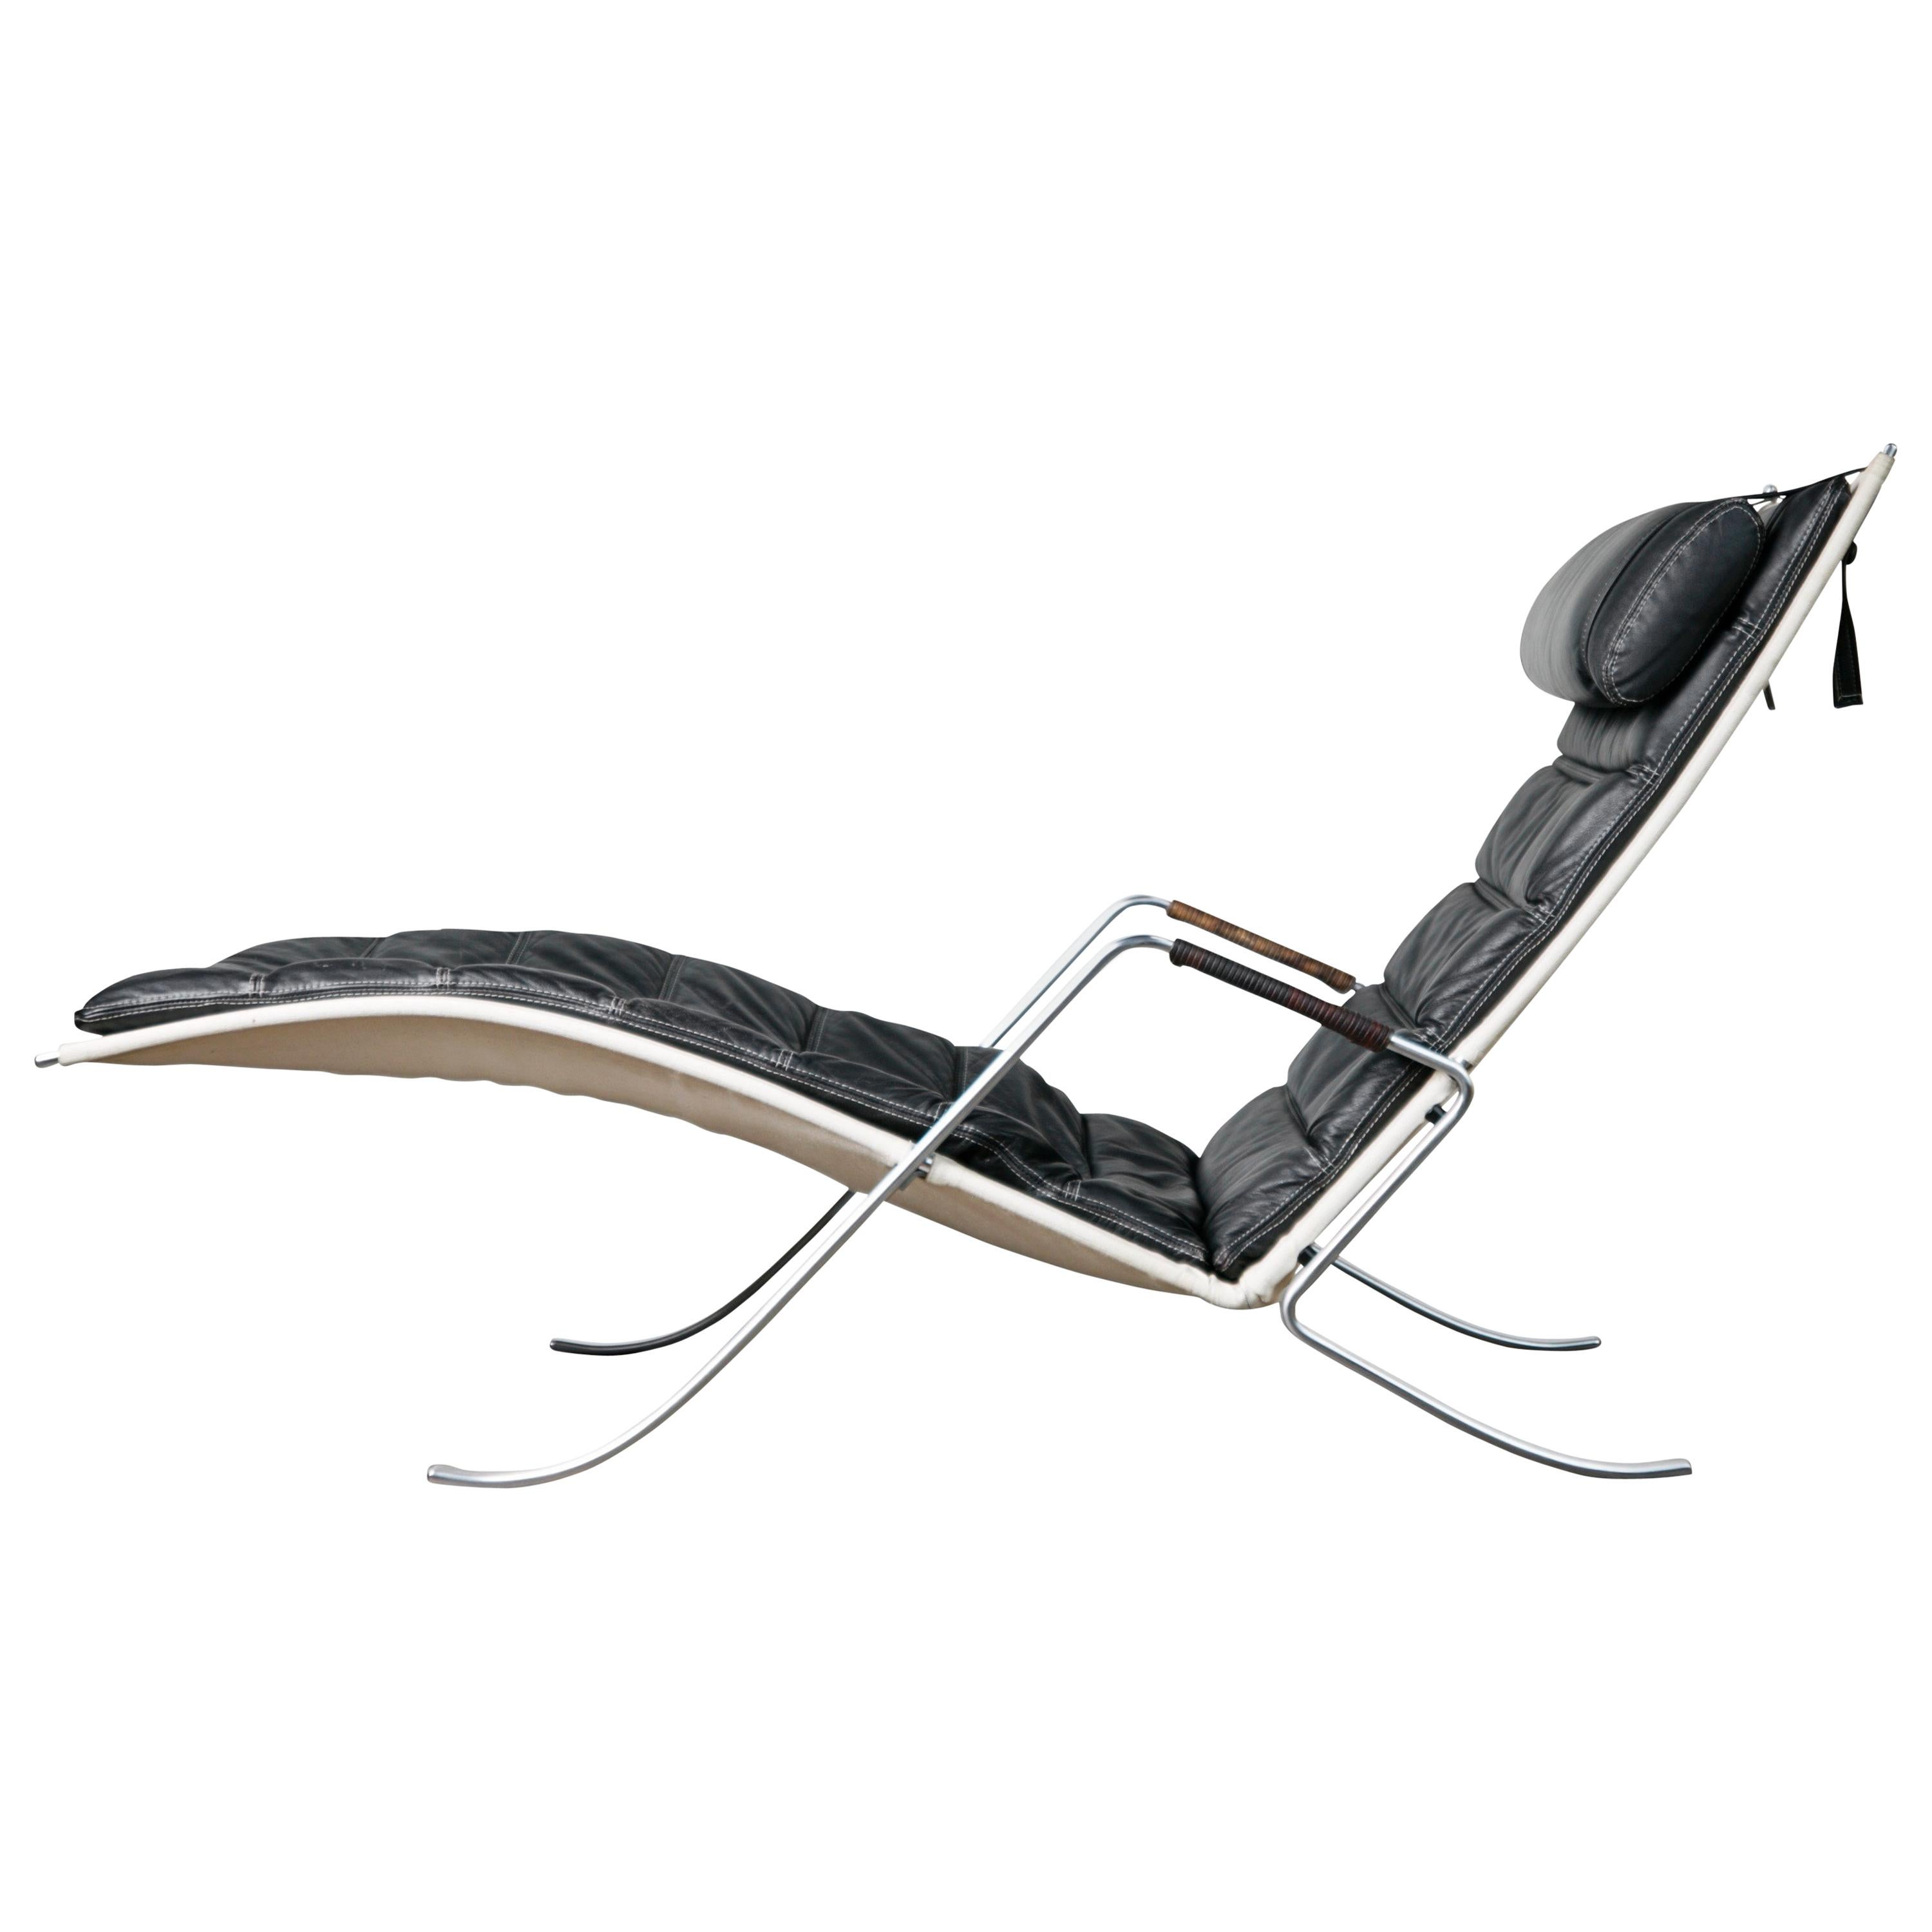 FK-87 Grasshopper Chaise by Fabricius & Kastholm for Alfred Kill, circa 1960